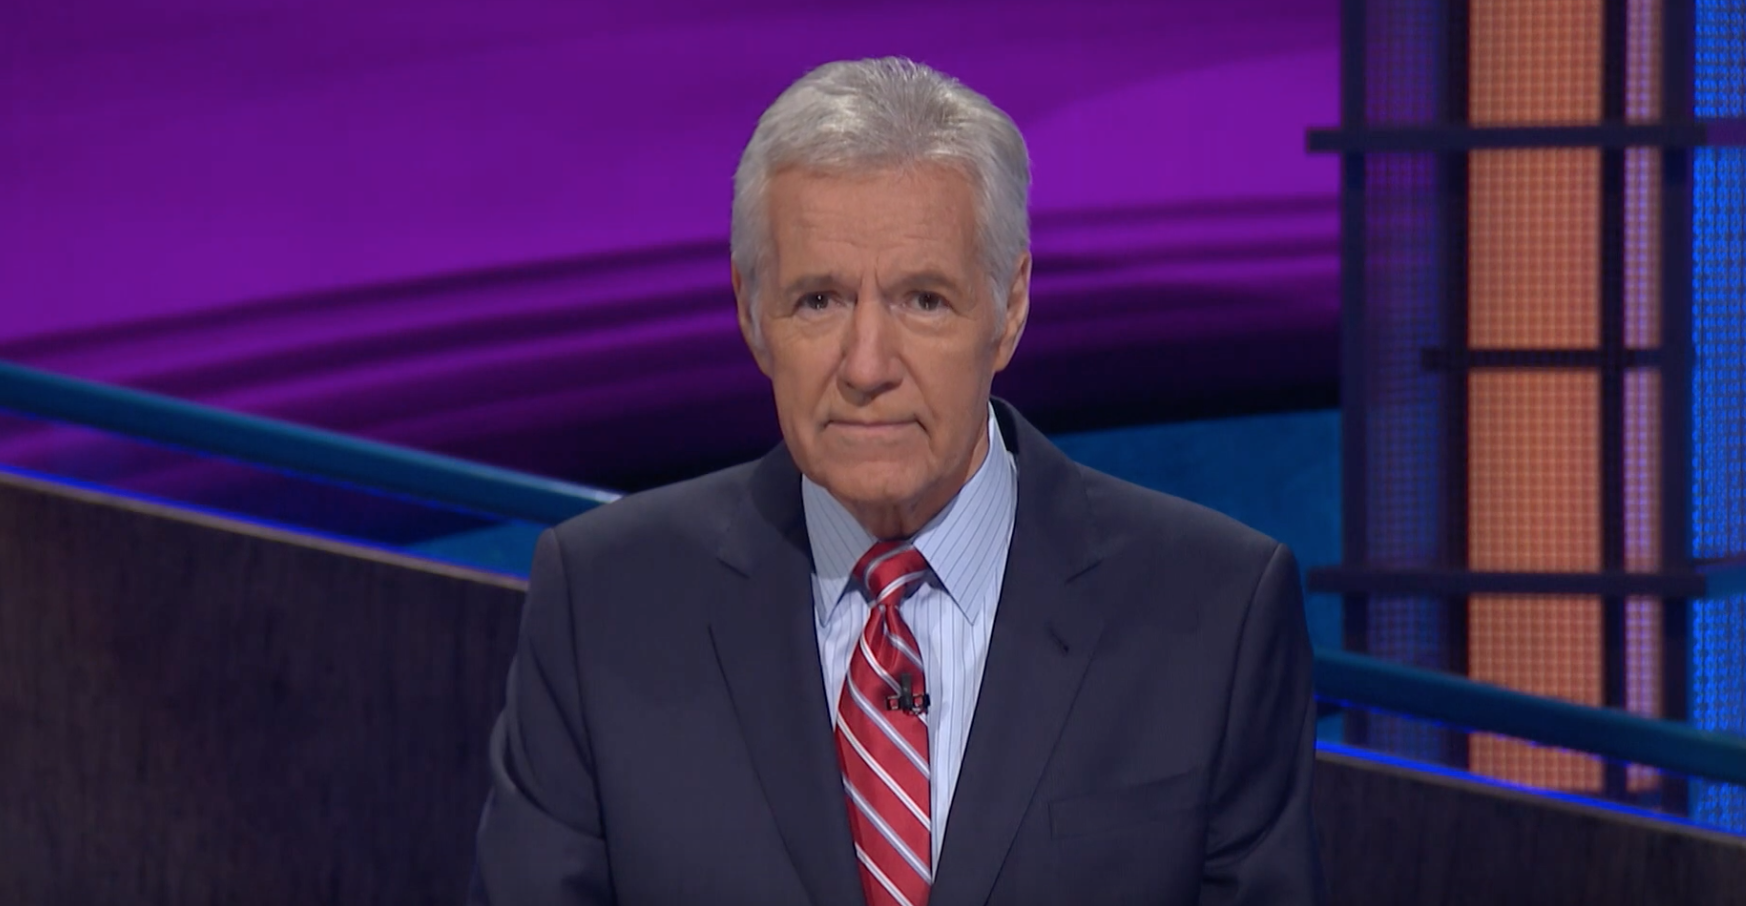 PHOTO: Alex Trebek from the Jeopardy! YouTube page